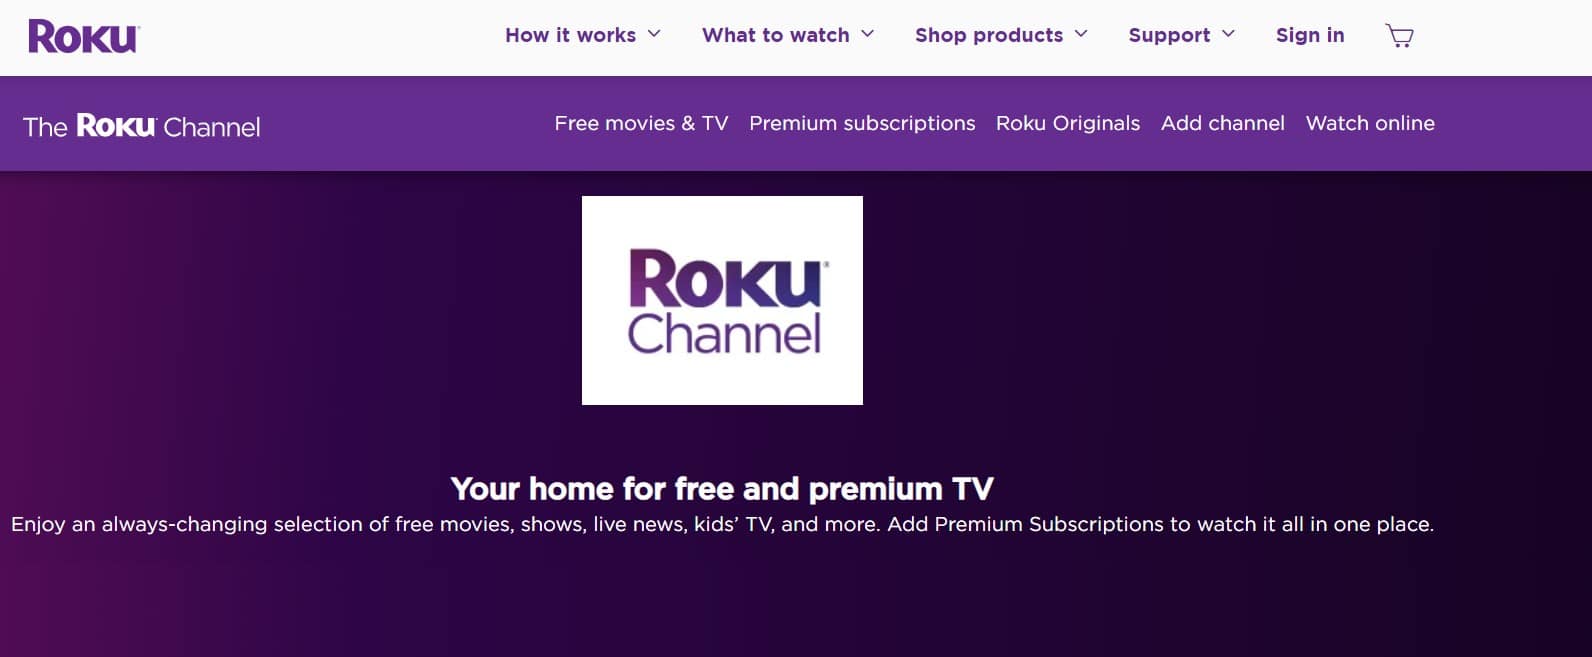 The Roku Channel: Best Free Movie Streaming Services